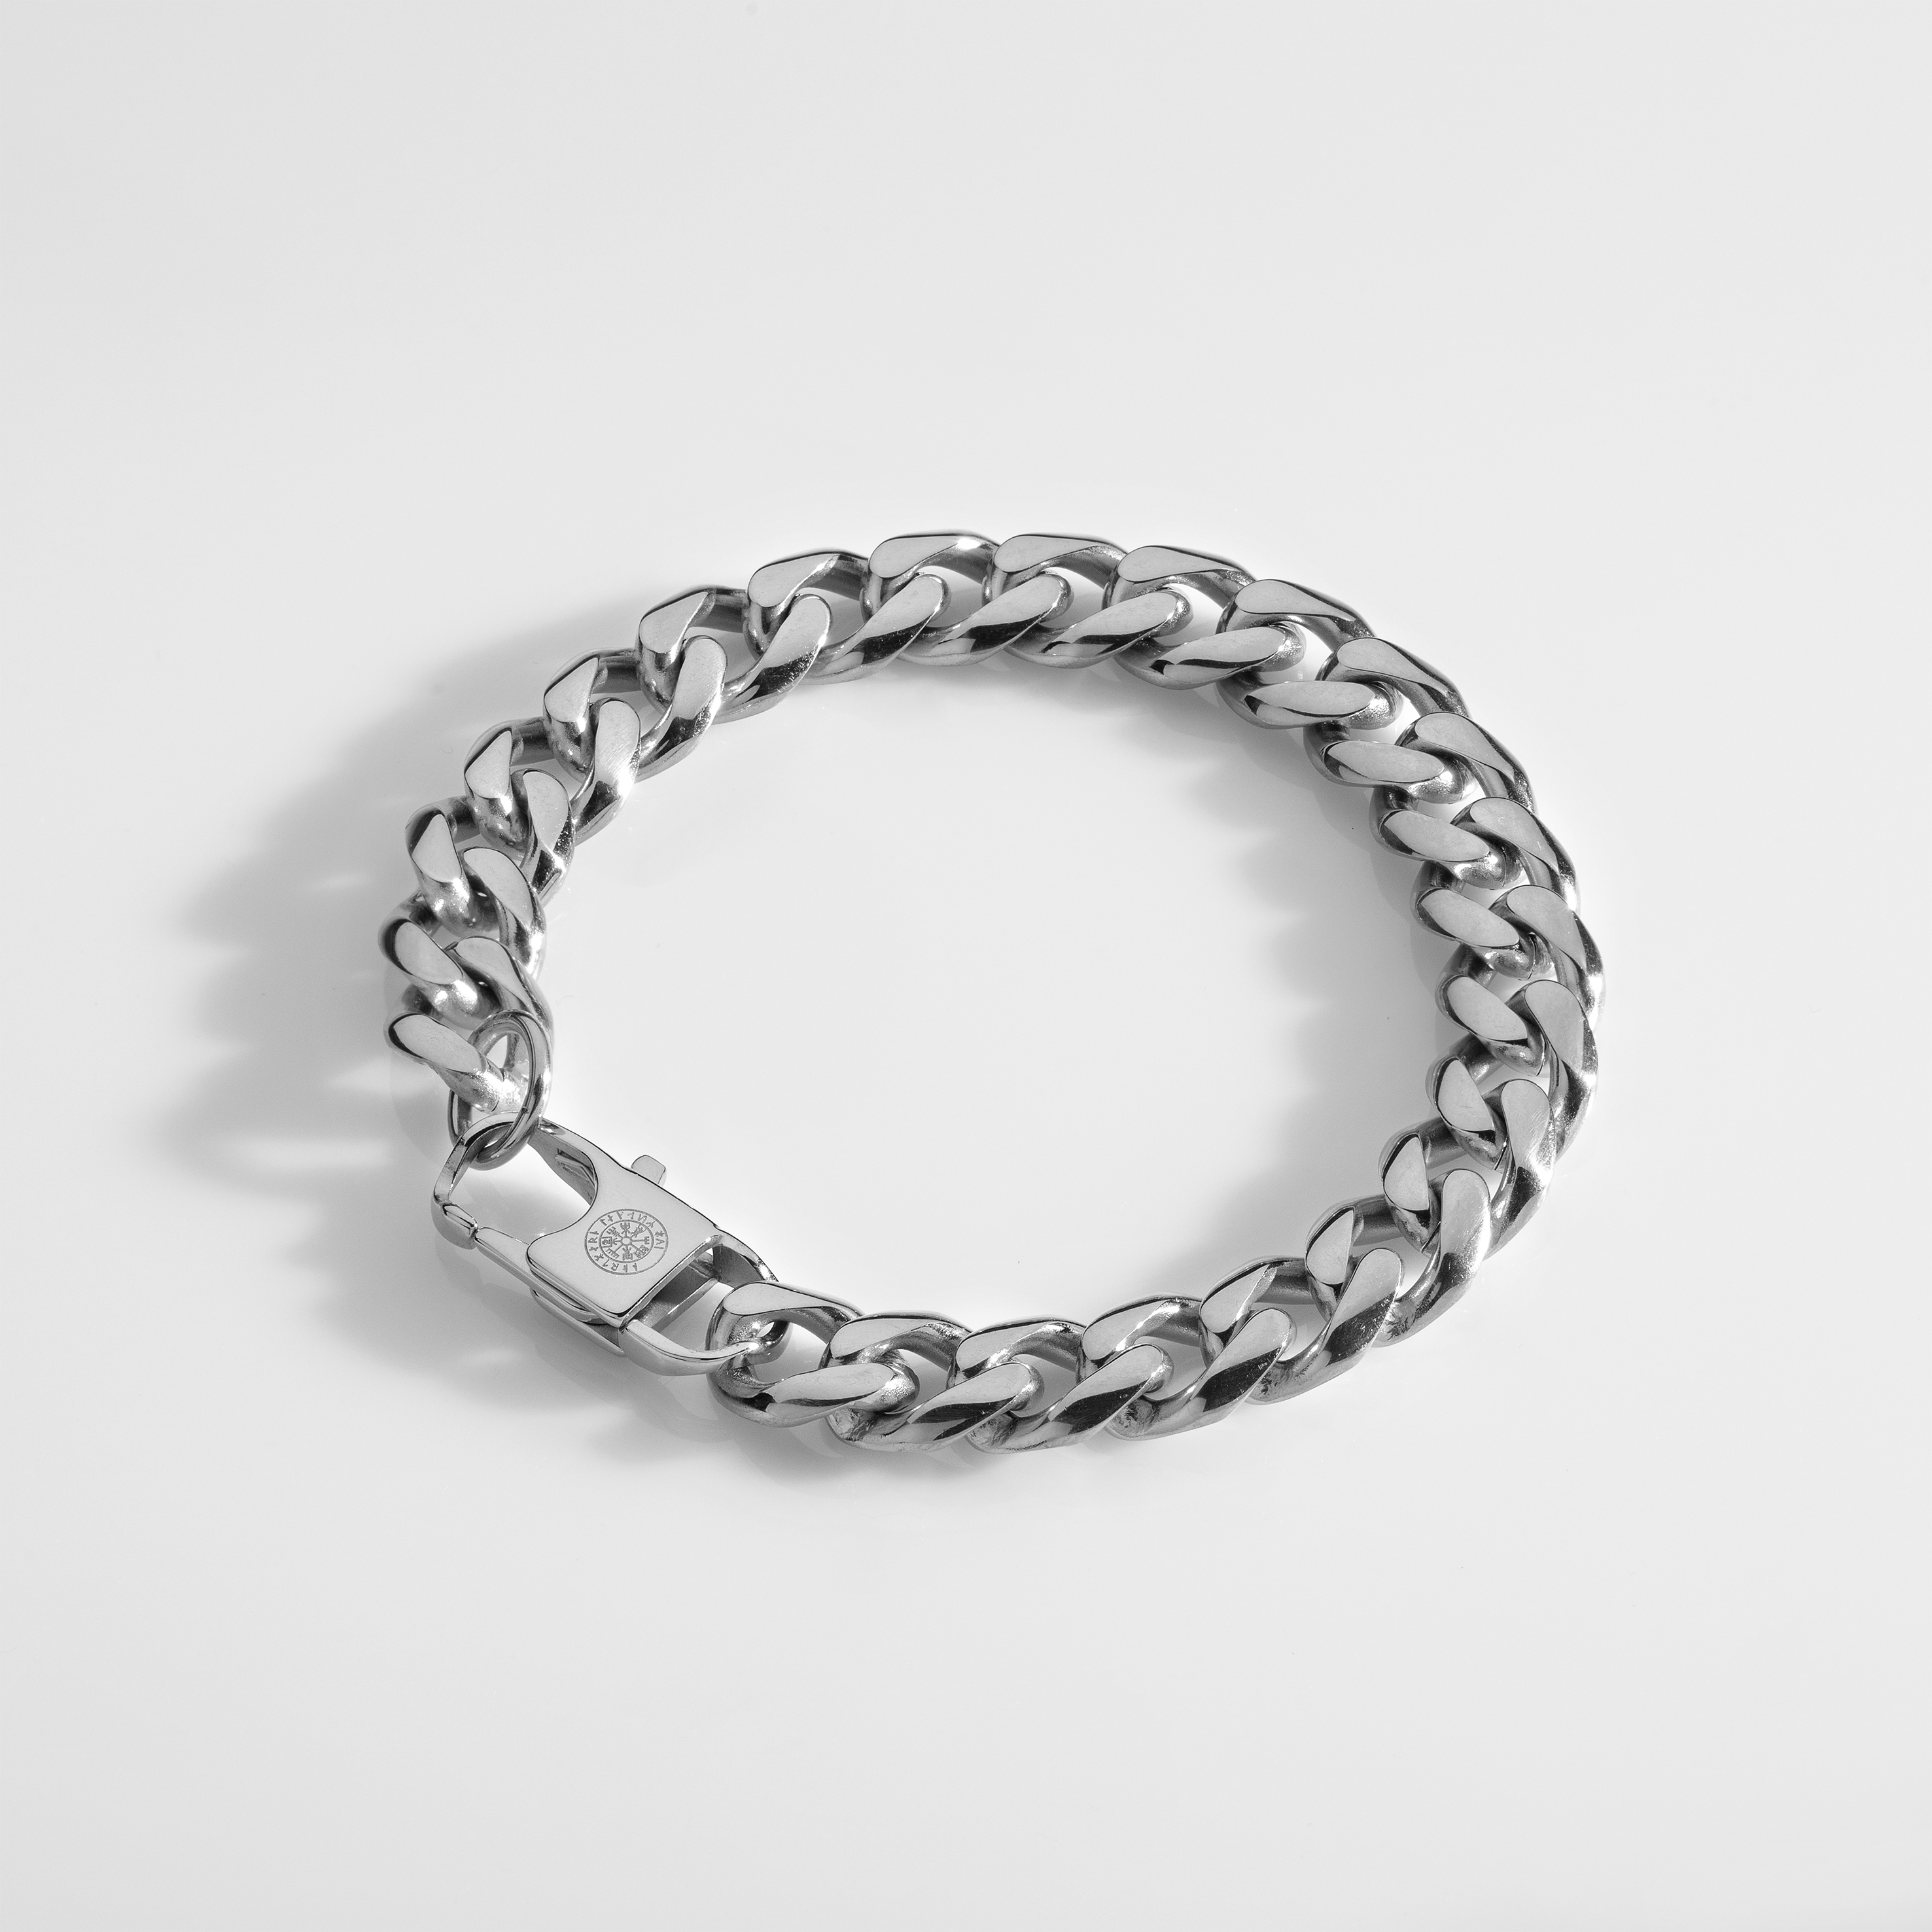 NL Sequence bracelet - Silver - Silver bangles - Northern Legacy